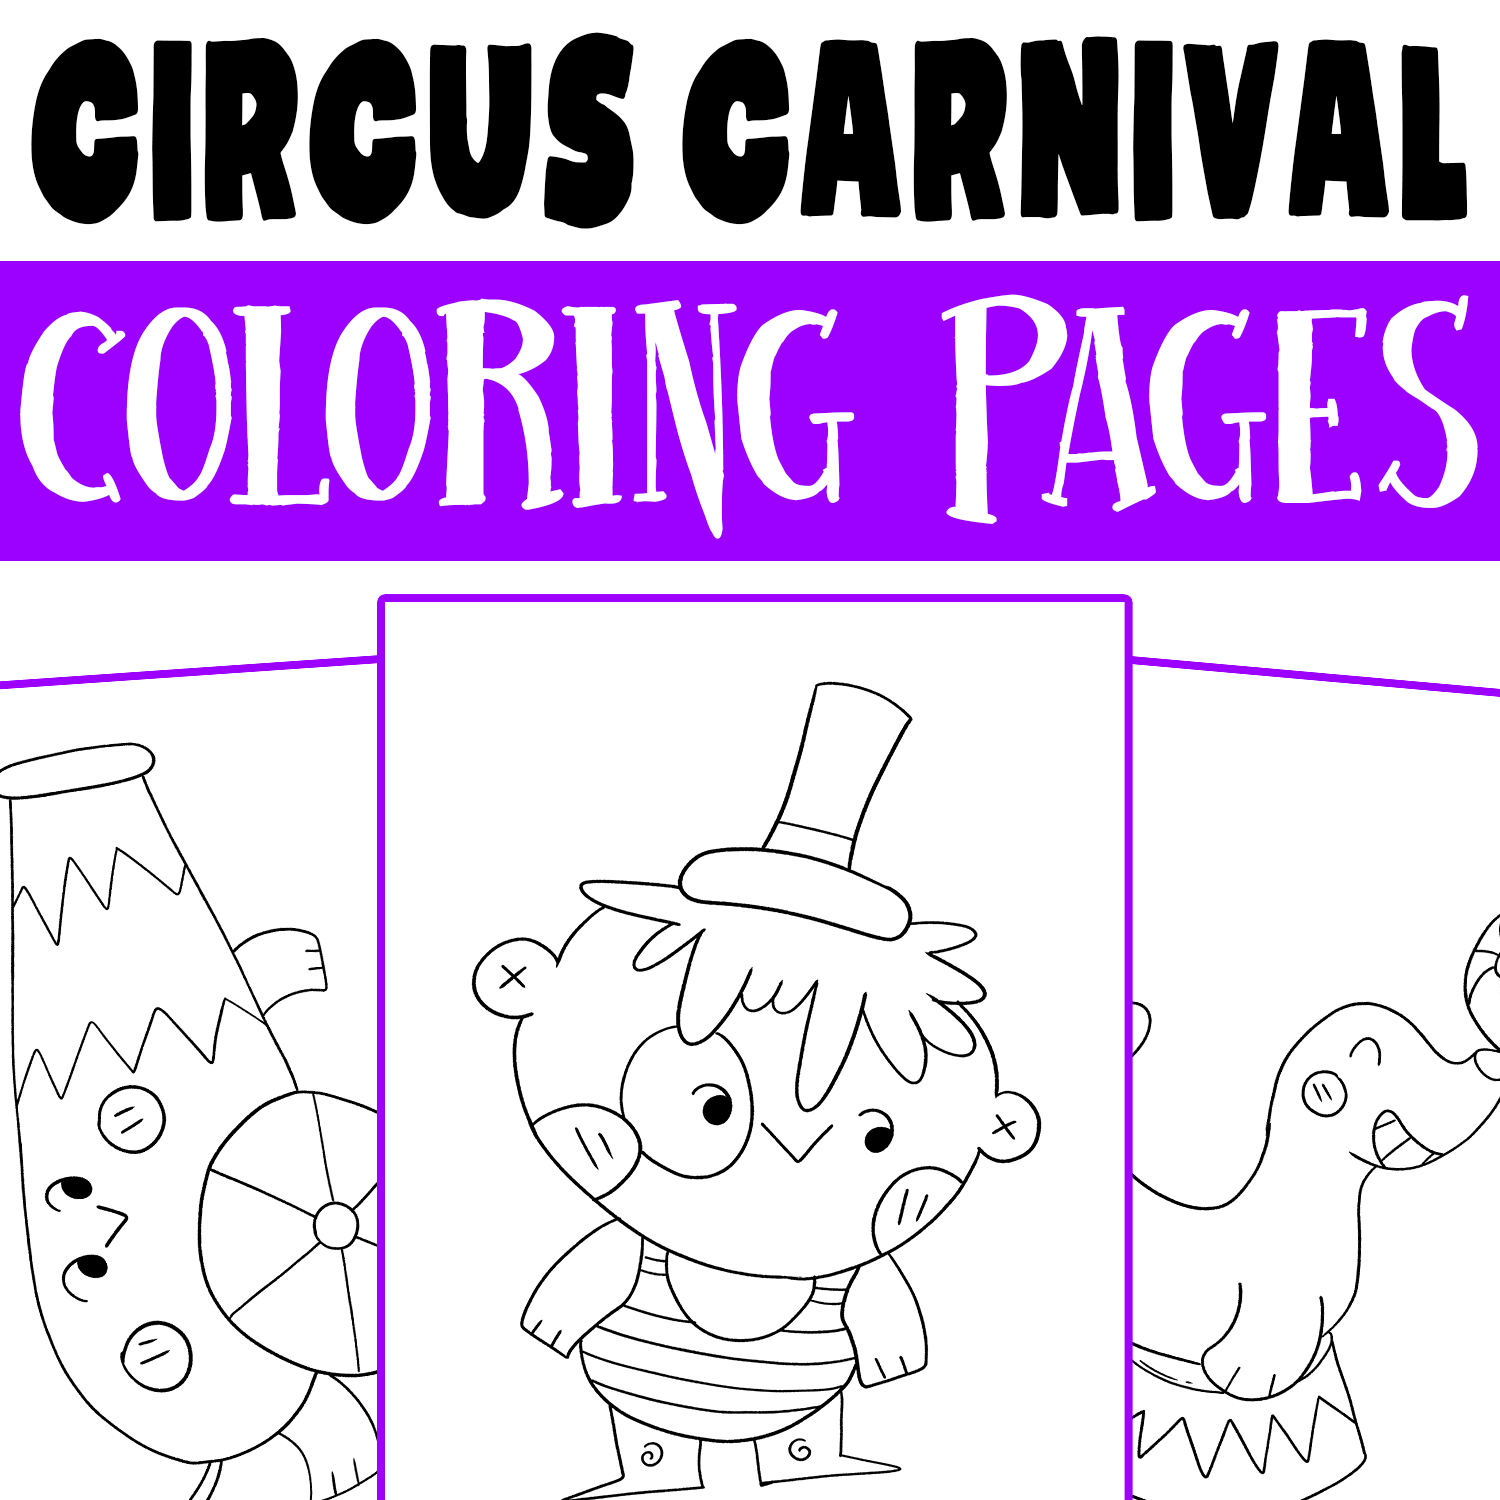 Circus carnival coloring pages circus birthday party coloring sheets activity made by teachers